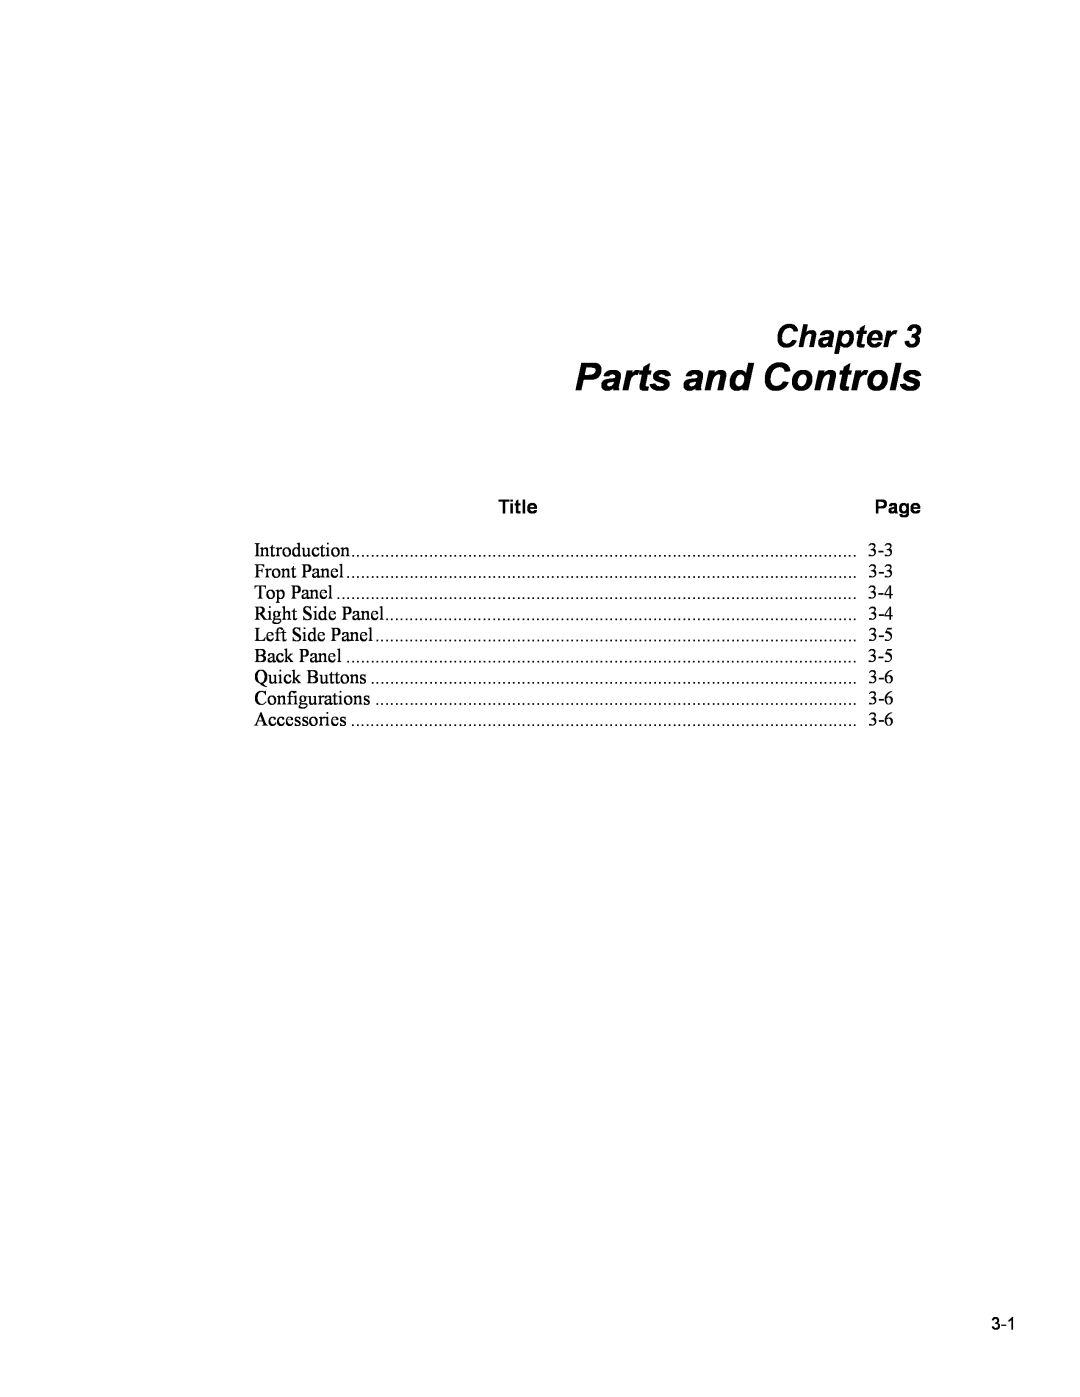 Fluke 5020A user manual Parts and Controls, Chapter, Title, Page 